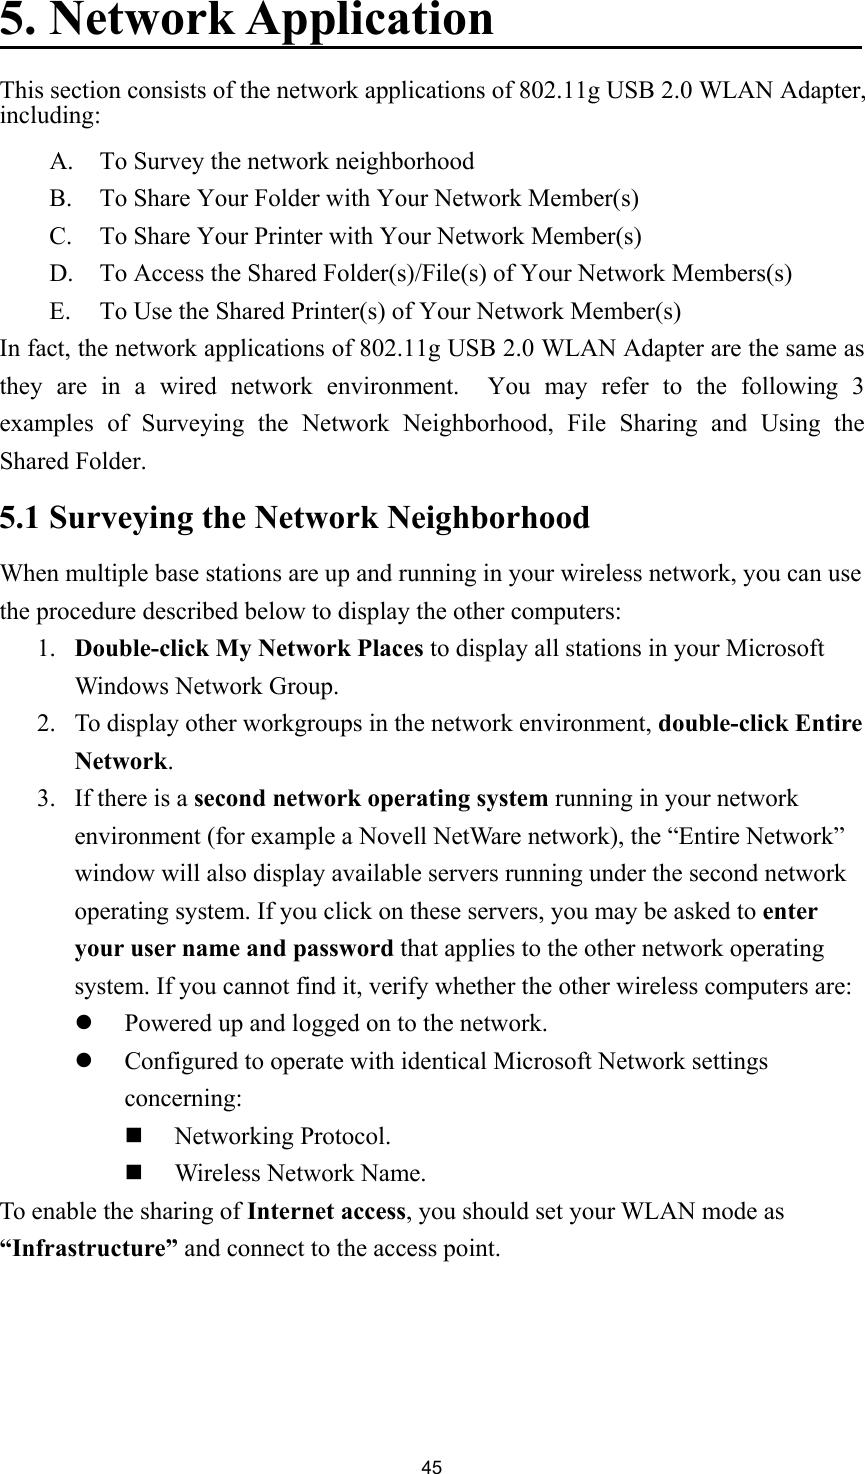 455. Network ApplicationThis section consists of the network applications of 802.11g USB 2.0 WLAN Adapter,including:A. To Survey the network neighborhoodB. To Share Your Folder with Your Network Member(s)C. To Share Your Printer with Your Network Member(s)D. To Access the Shared Folder(s)/File(s) of Your Network Members(s)E. To Use the Shared Printer(s) of Your Network Member(s)In fact, the network applications of 802.11g USB 2.0 WLAN Adapter are the same asthey are in a wired network environment.  You may refer to the following 3examples of Surveying the Network Neighborhood, File Sharing and Using theShared Folder.5.1 Surveying the Network NeighborhoodWhen multiple base stations are up and running in your wireless network, you can usethe procedure described below to display the other computers:1. Double-click My Network Places to display all stations in your MicrosoftWindows Network Group.2. To display other workgroups in the network environment, double-click EntireNetwork.3. If there is a second network operating system running in your networkenvironment (for example a Novell NetWare network), the “Entire Network”window will also display available servers running under the second networkoperating system. If you click on these servers, you may be asked to enteryour user name and password that applies to the other network operatingsystem. If you cannot find it, verify whether the other wireless computers are:z Powered up and logged on to the network.z Configured to operate with identical Microsoft Network settingsconcerning: Networking Protocol. Wireless Network Name.To enable the sharing of Internet access, you should set your WLAN mode as“Infrastructure” and connect to the access point.